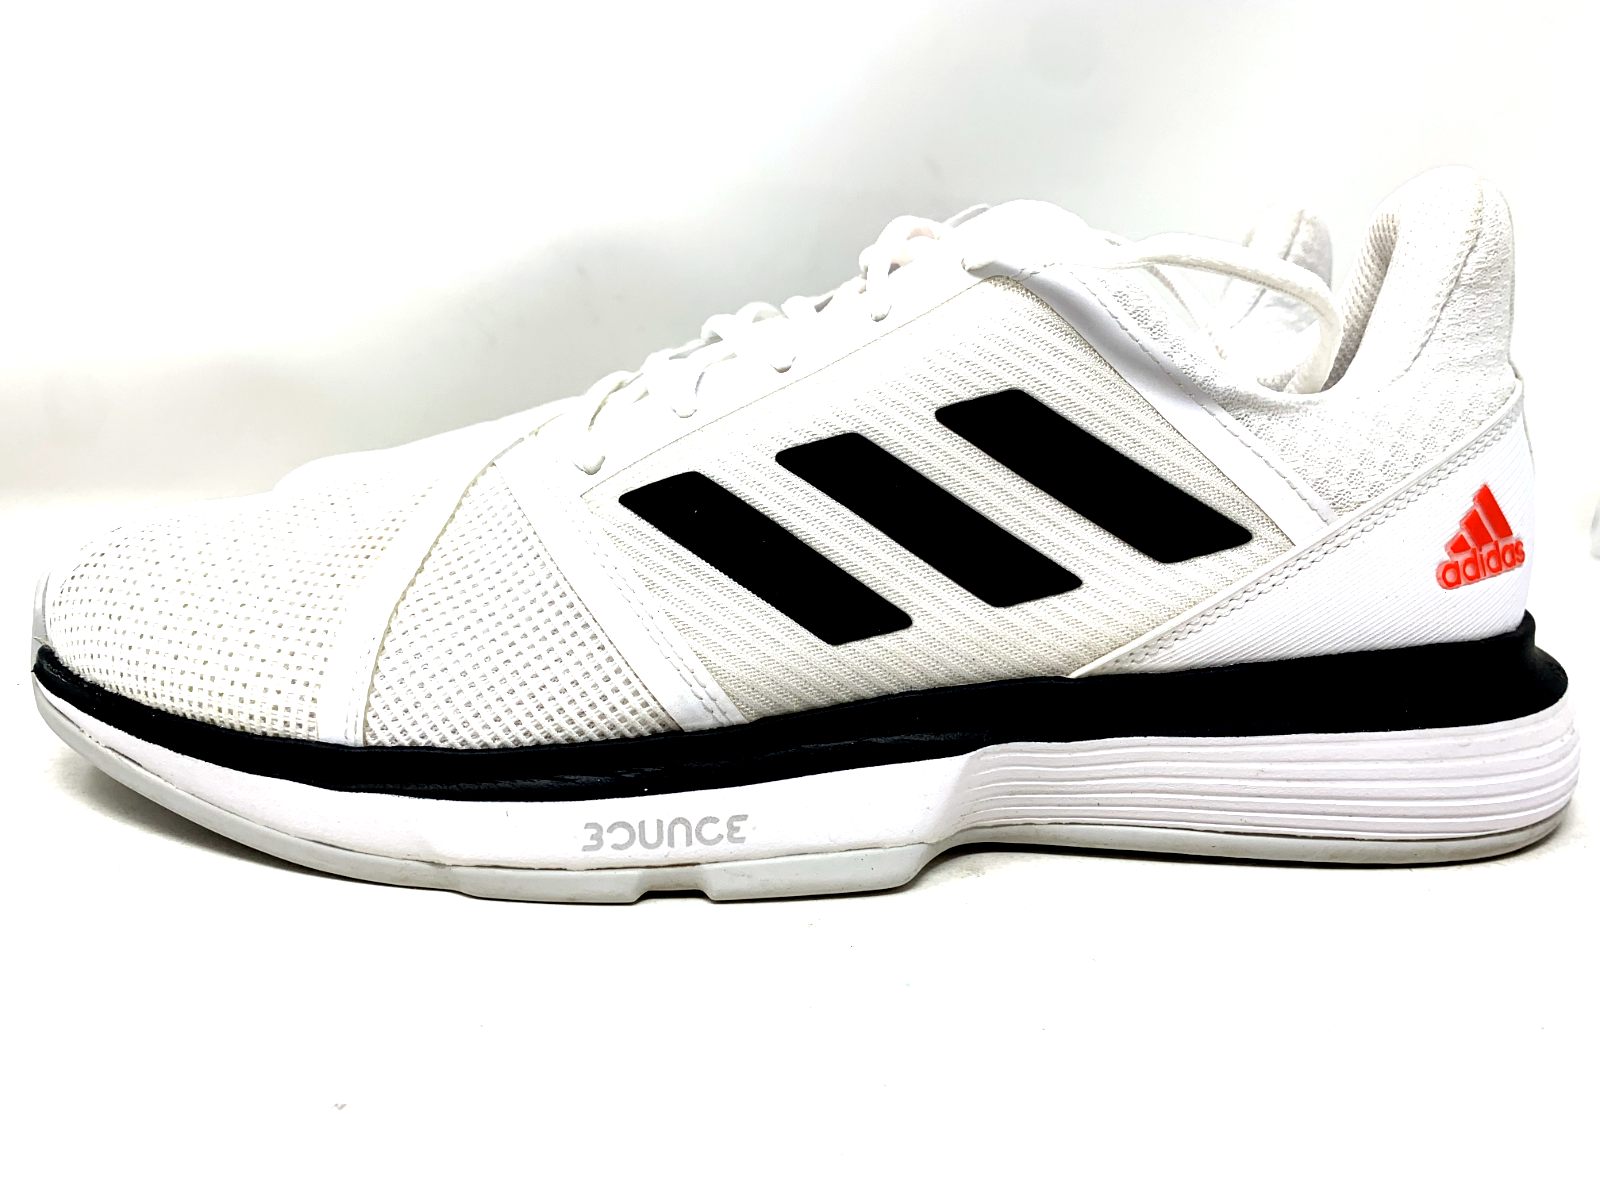 Adidas CourtJam Bounce Men's 12.5 White Tennis Shoe Athletic Sneakers ...